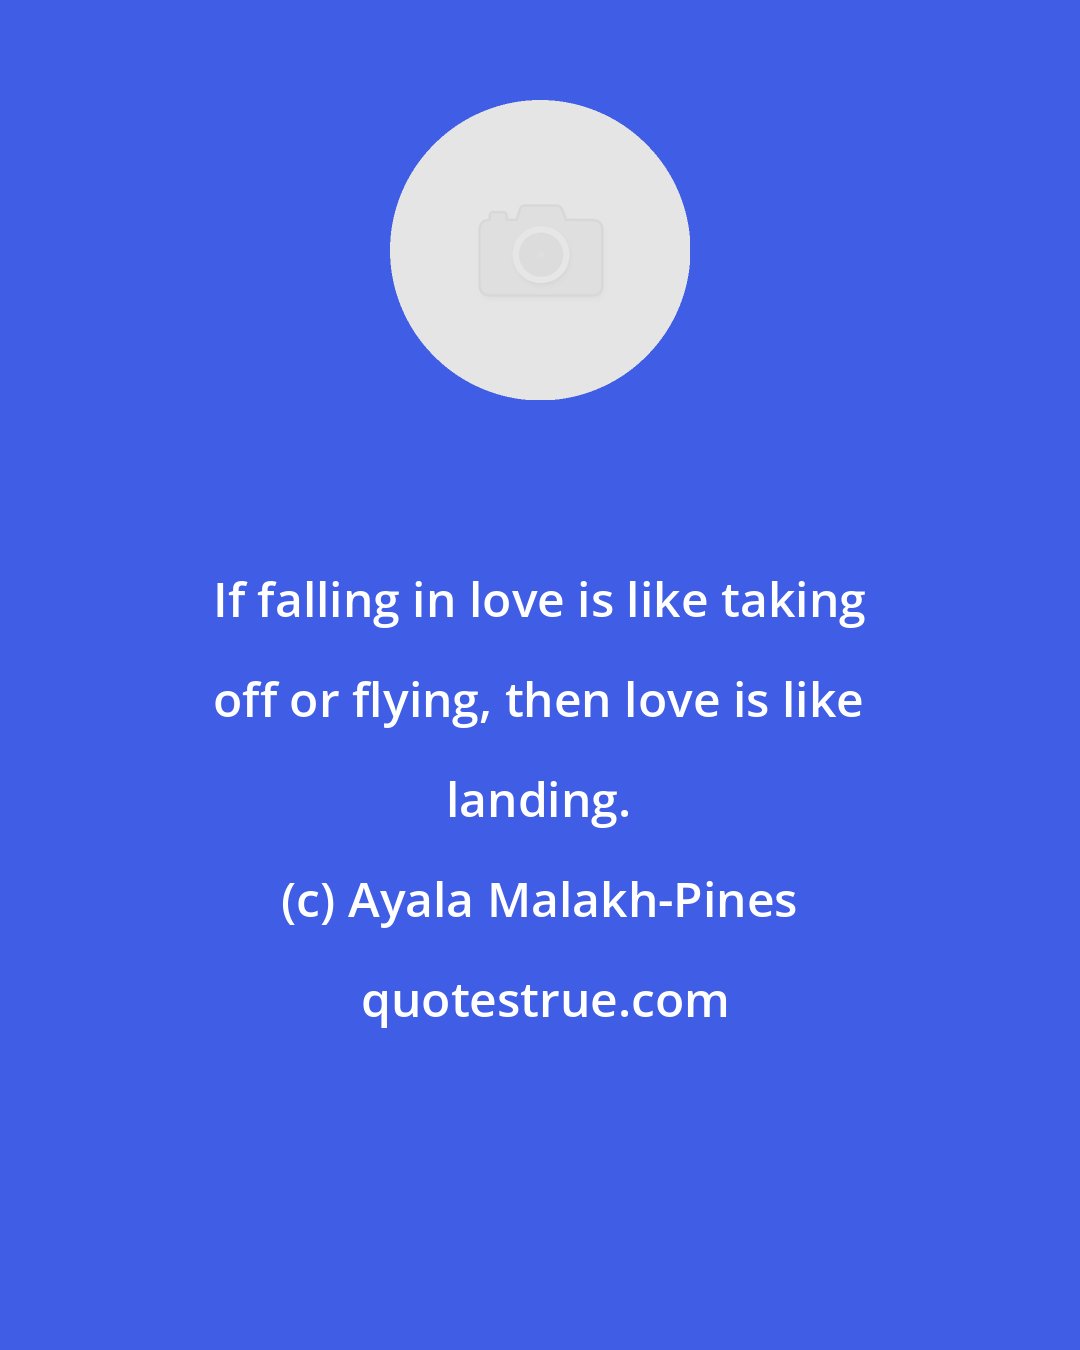 Ayala Malakh-Pines: If falling in love is like taking off or flying, then love is like landing.